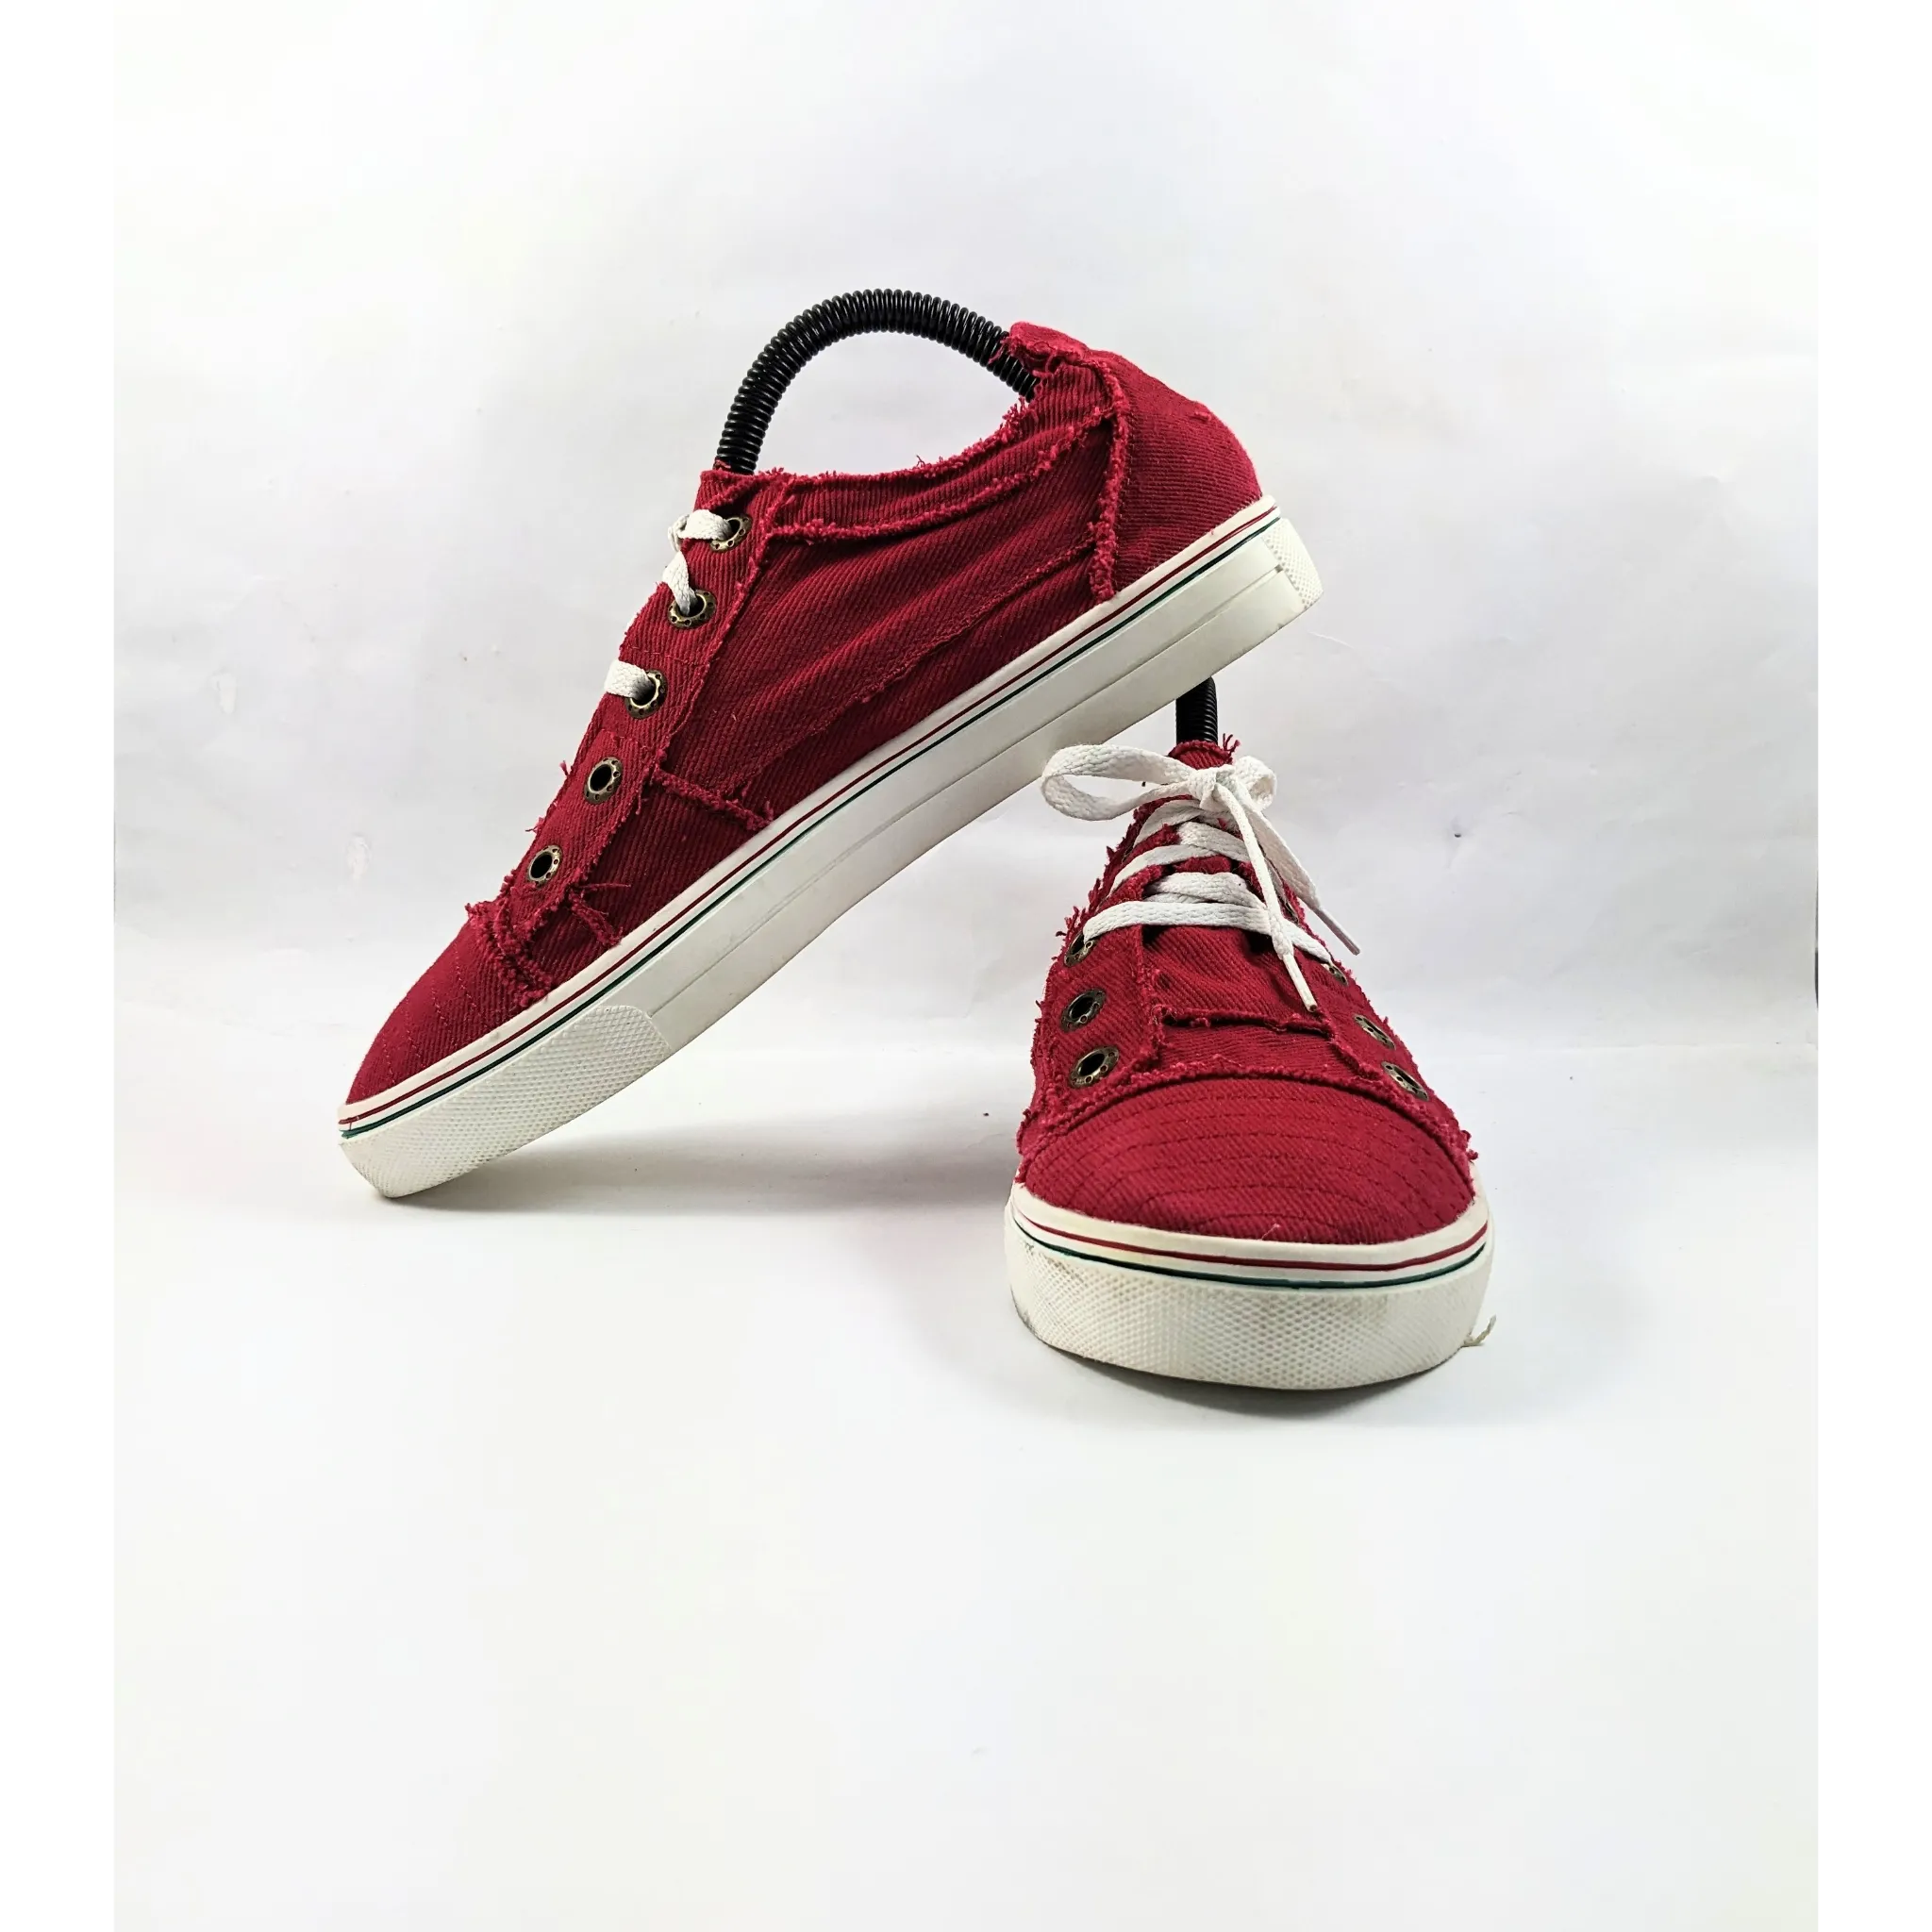 Jollimall Red Sneakers